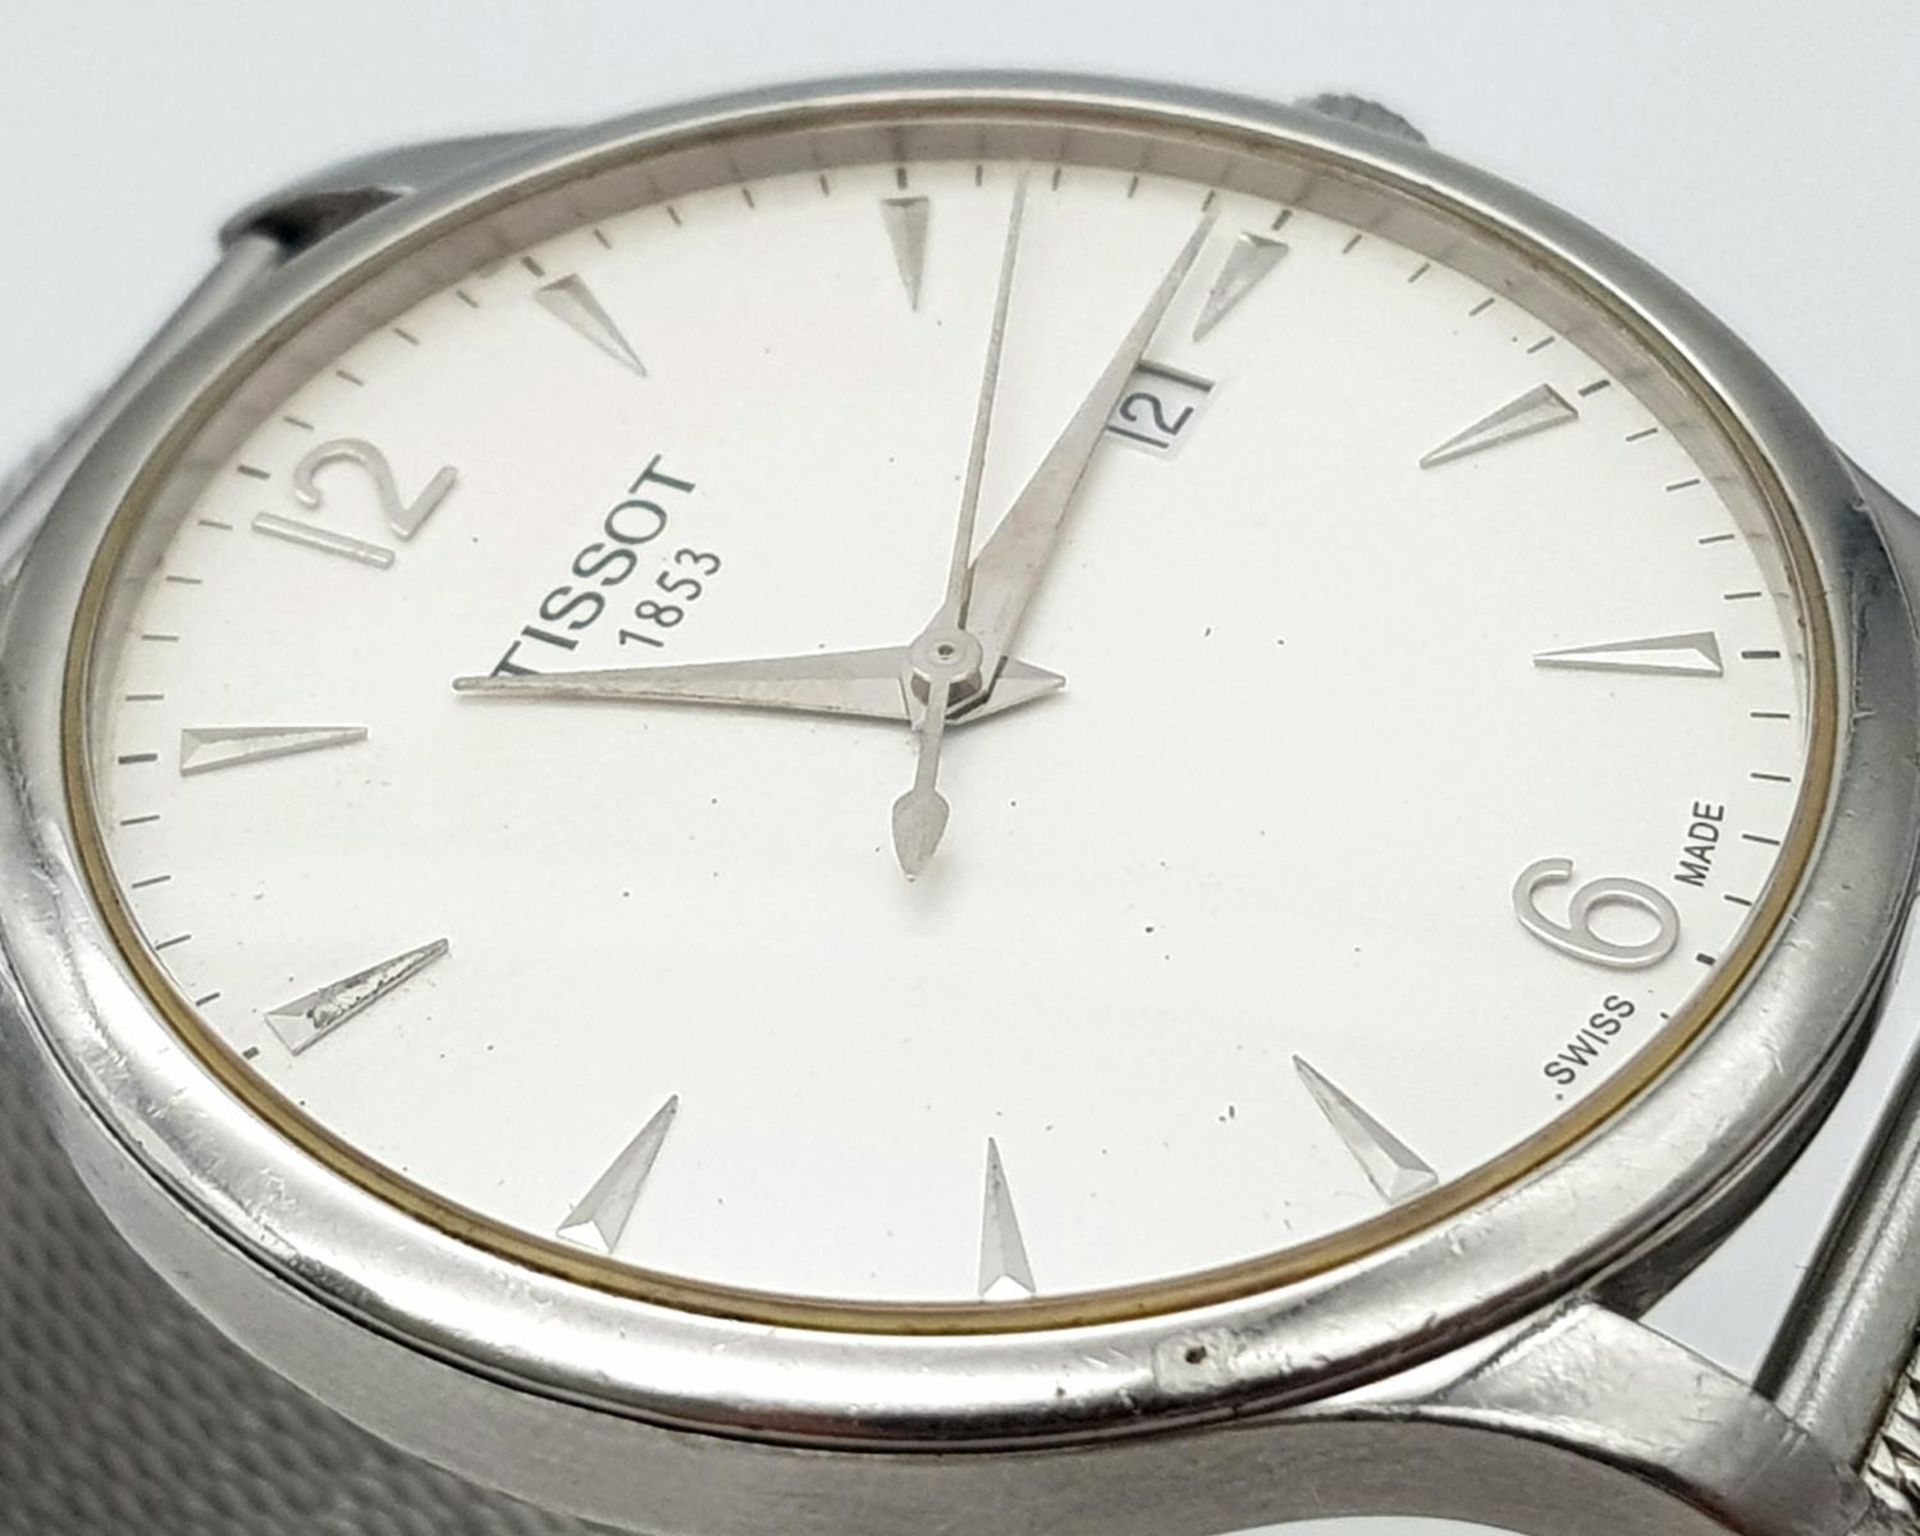 A Large Tissot Quartz Gents Watch. Stainless steel bracelet and case - 42mm. White dial with date - Image 3 of 6